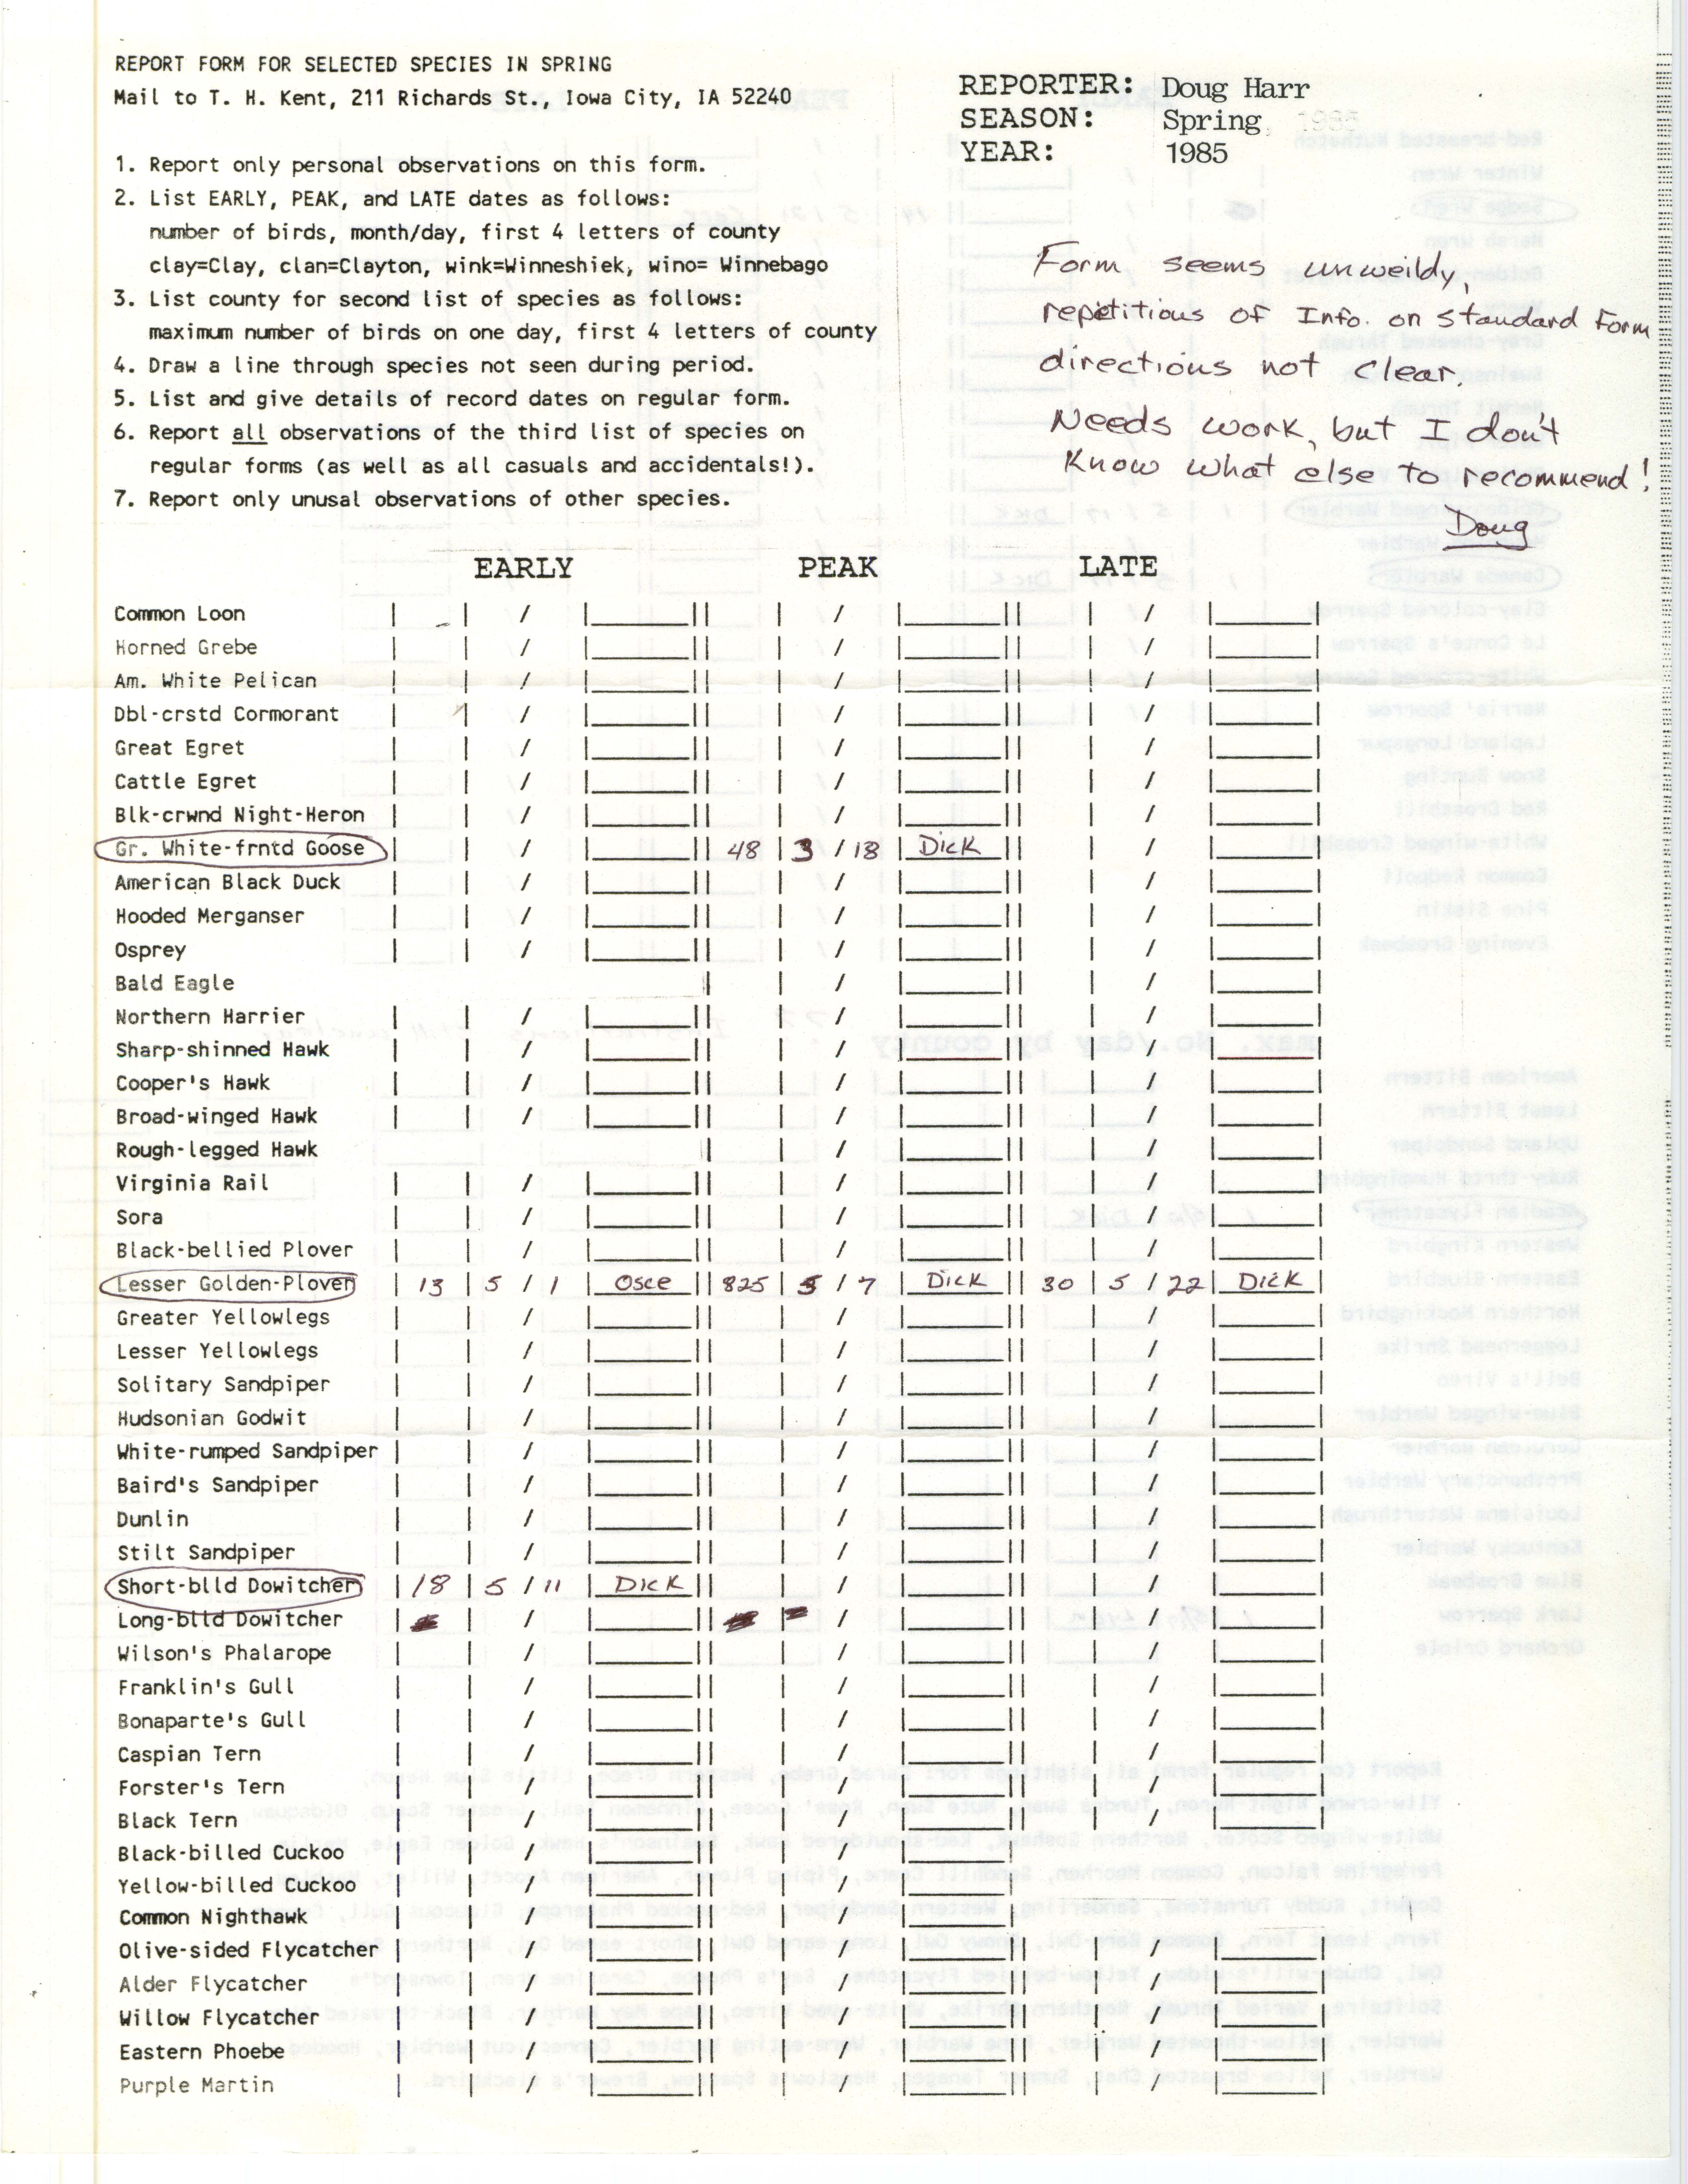 Report form for selected species in spring, contributed by Douglas C. Harr, spring 1985